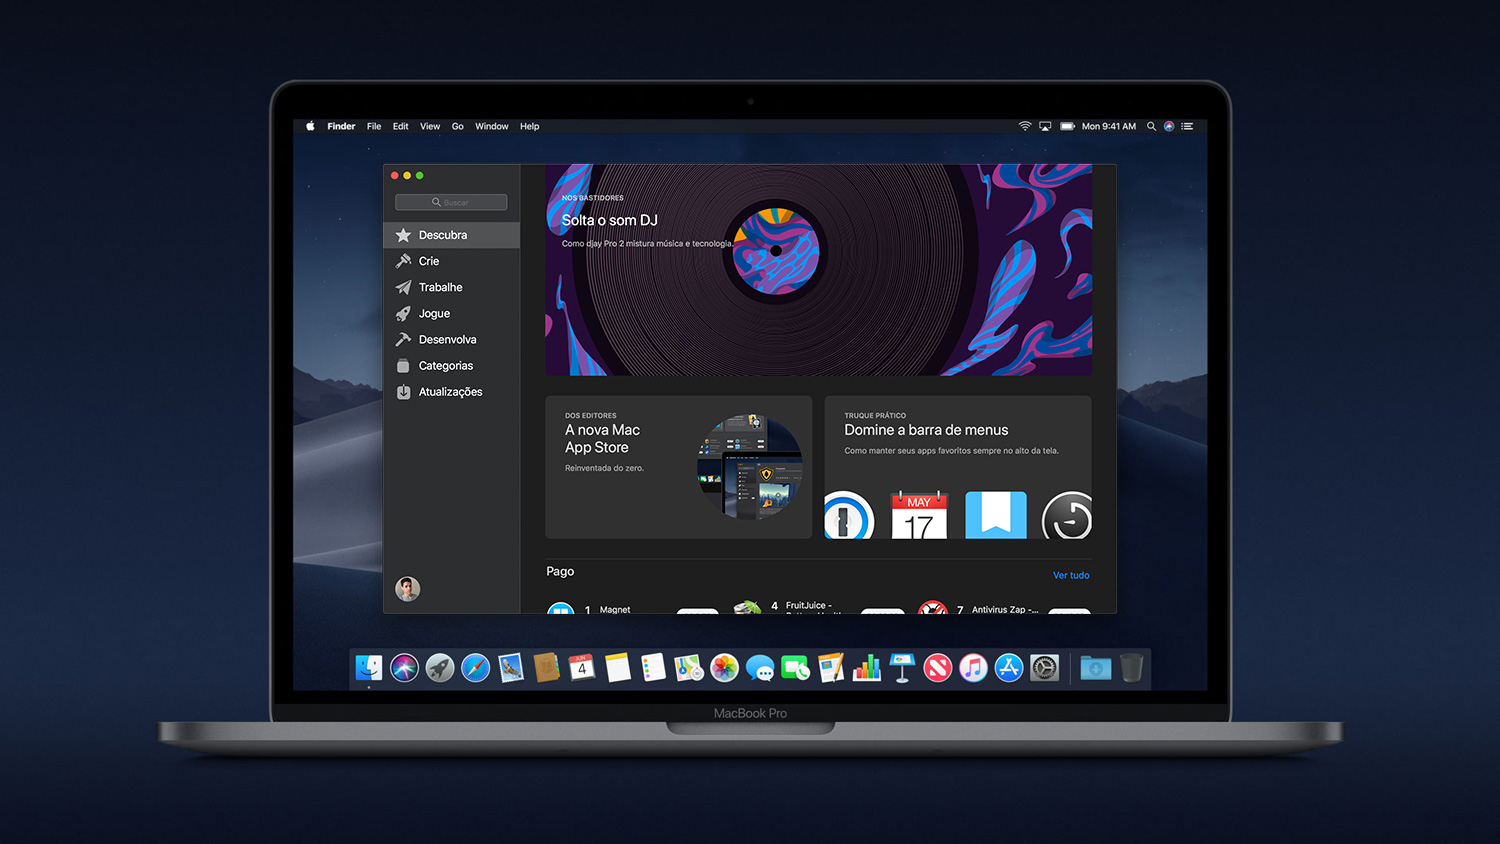 update to macos mojave